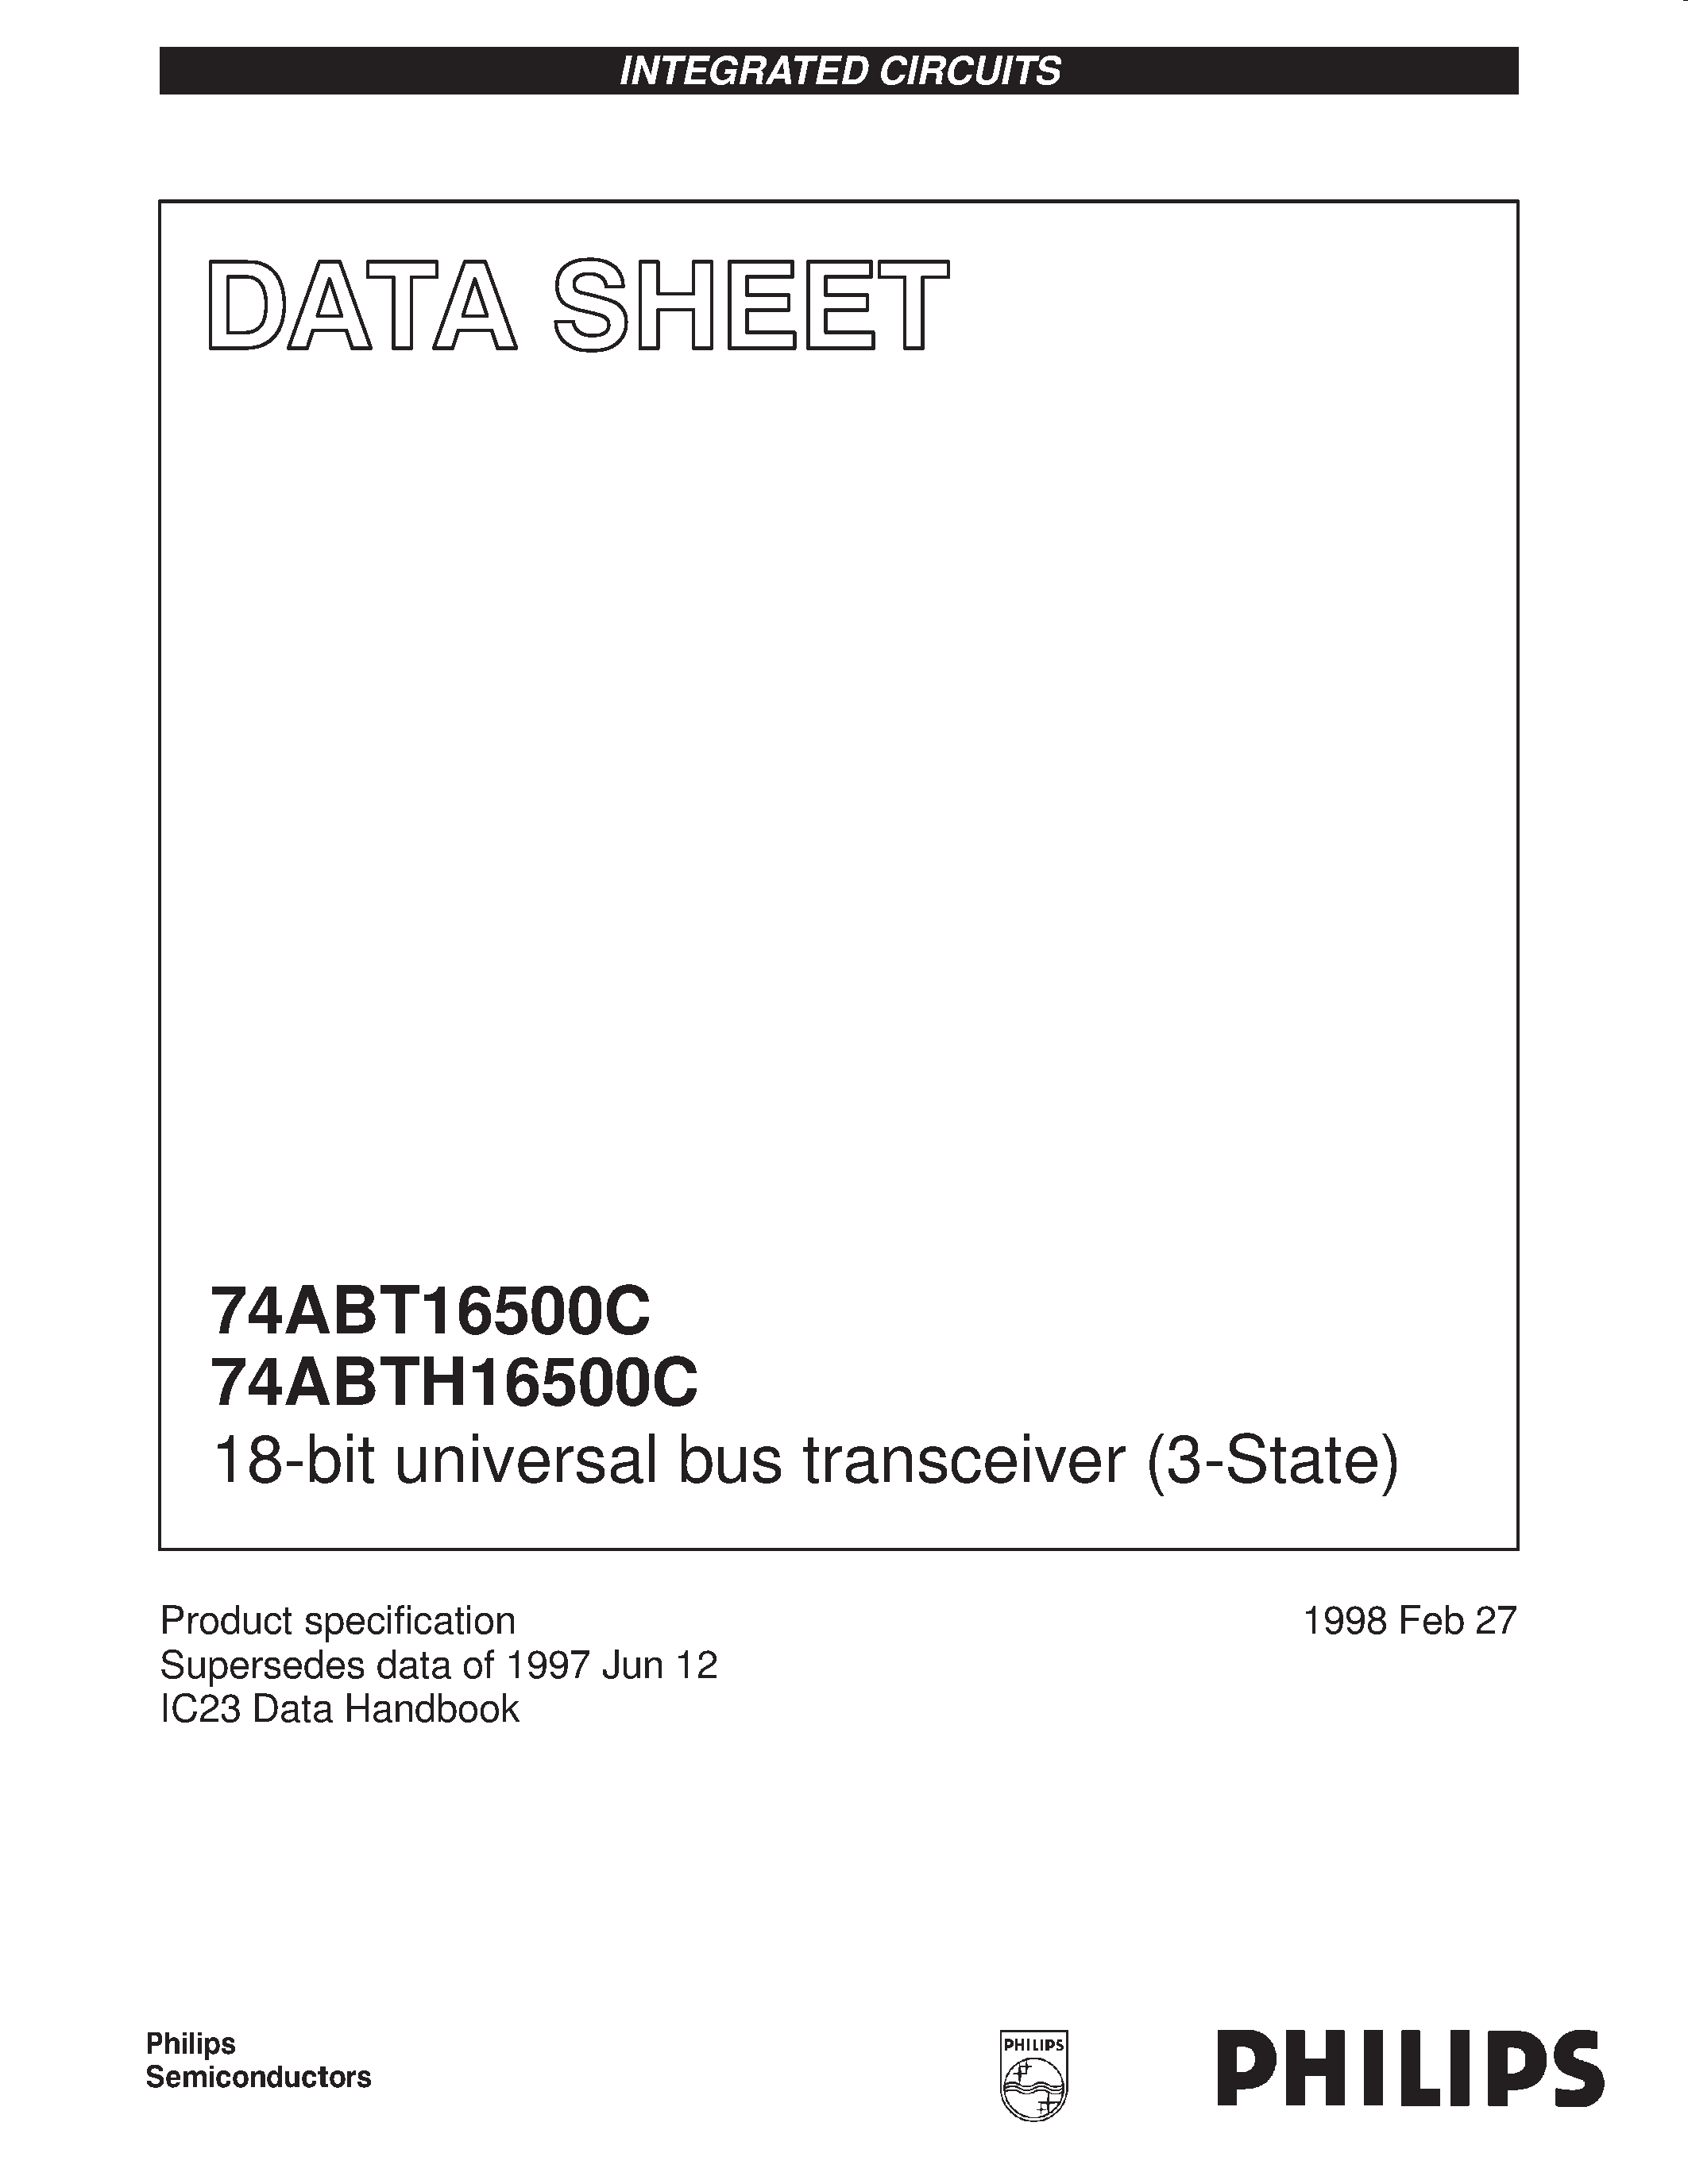 Даташит 74ABTH16500CDL - 18-bit universal bus transceiver 3-State страница 1